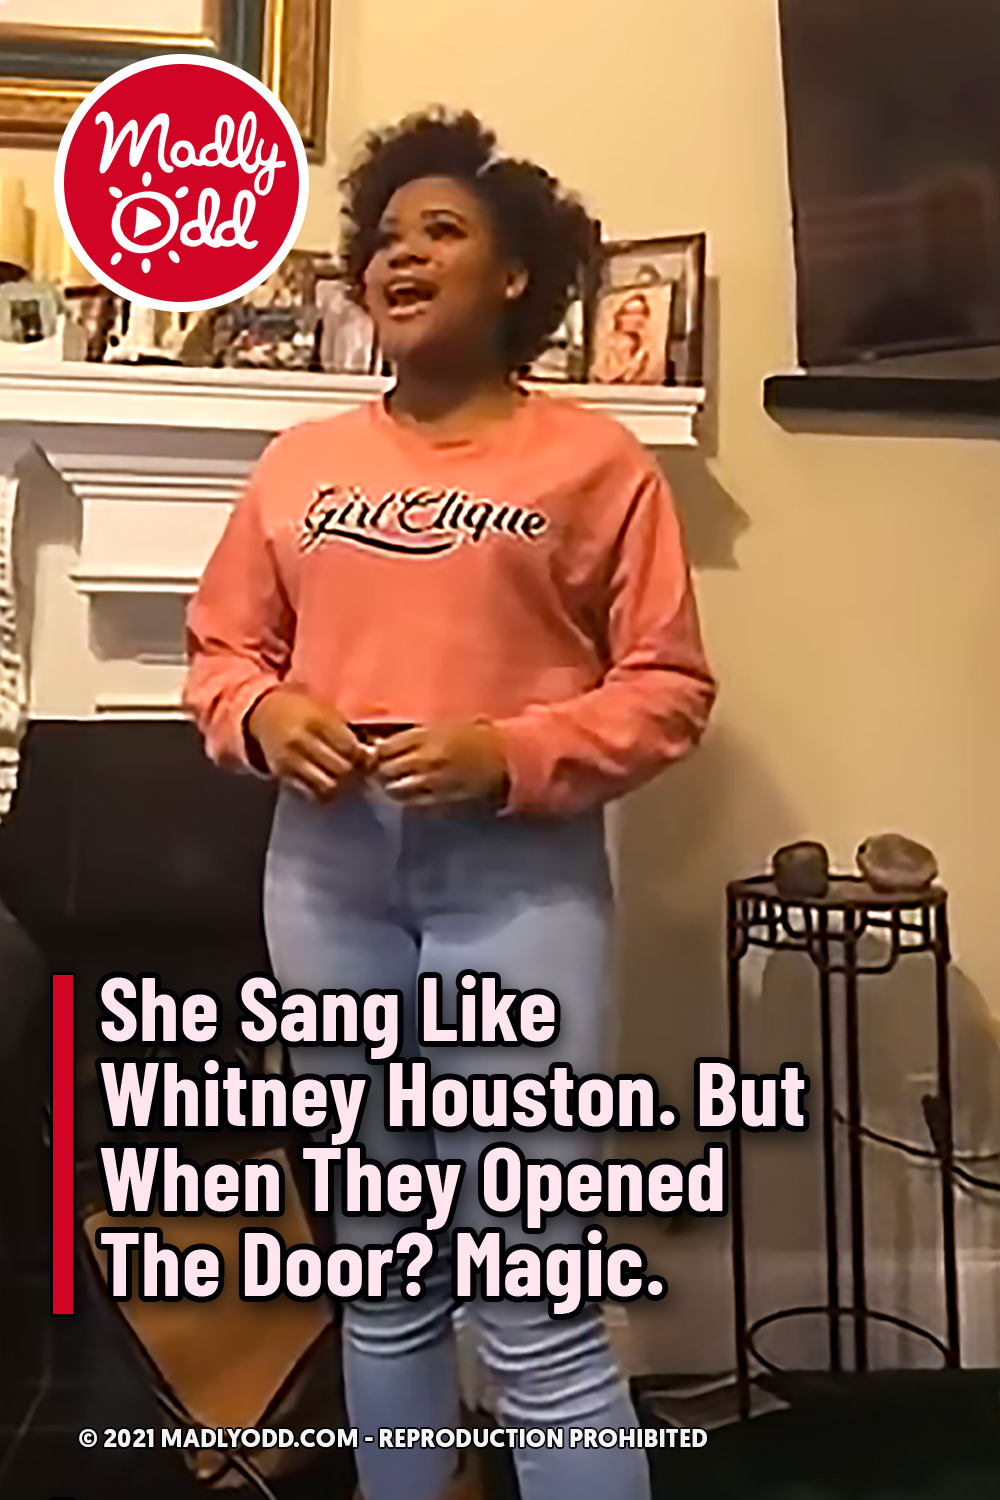 She Sang Like Whitney Houston. But When They Opened The Door? Magic.